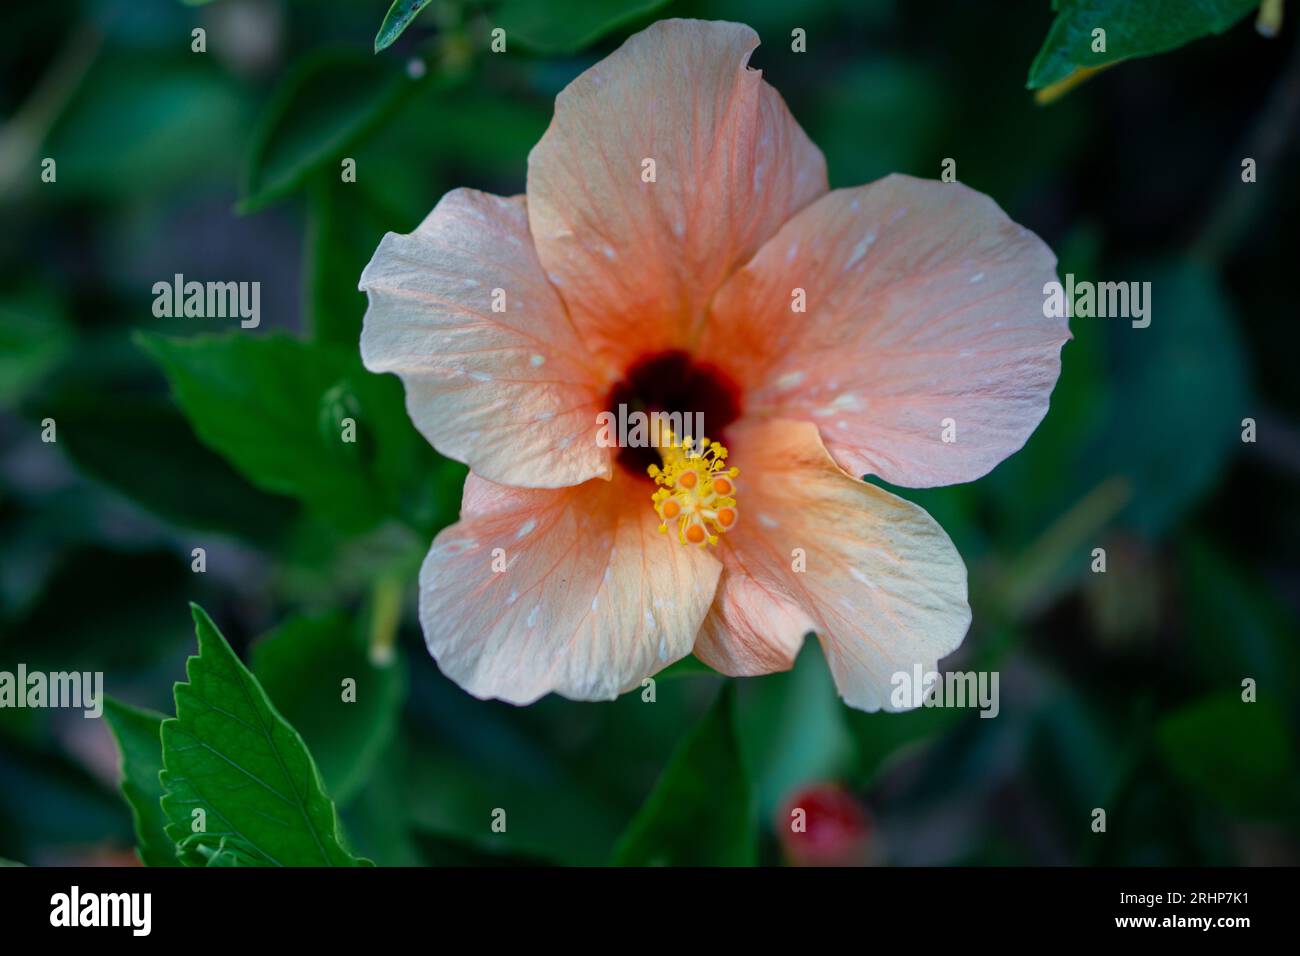 Orange hibiscus flower on a green leaves background. Another white flower can be seen at the back, and other blossoms. Stock Photo